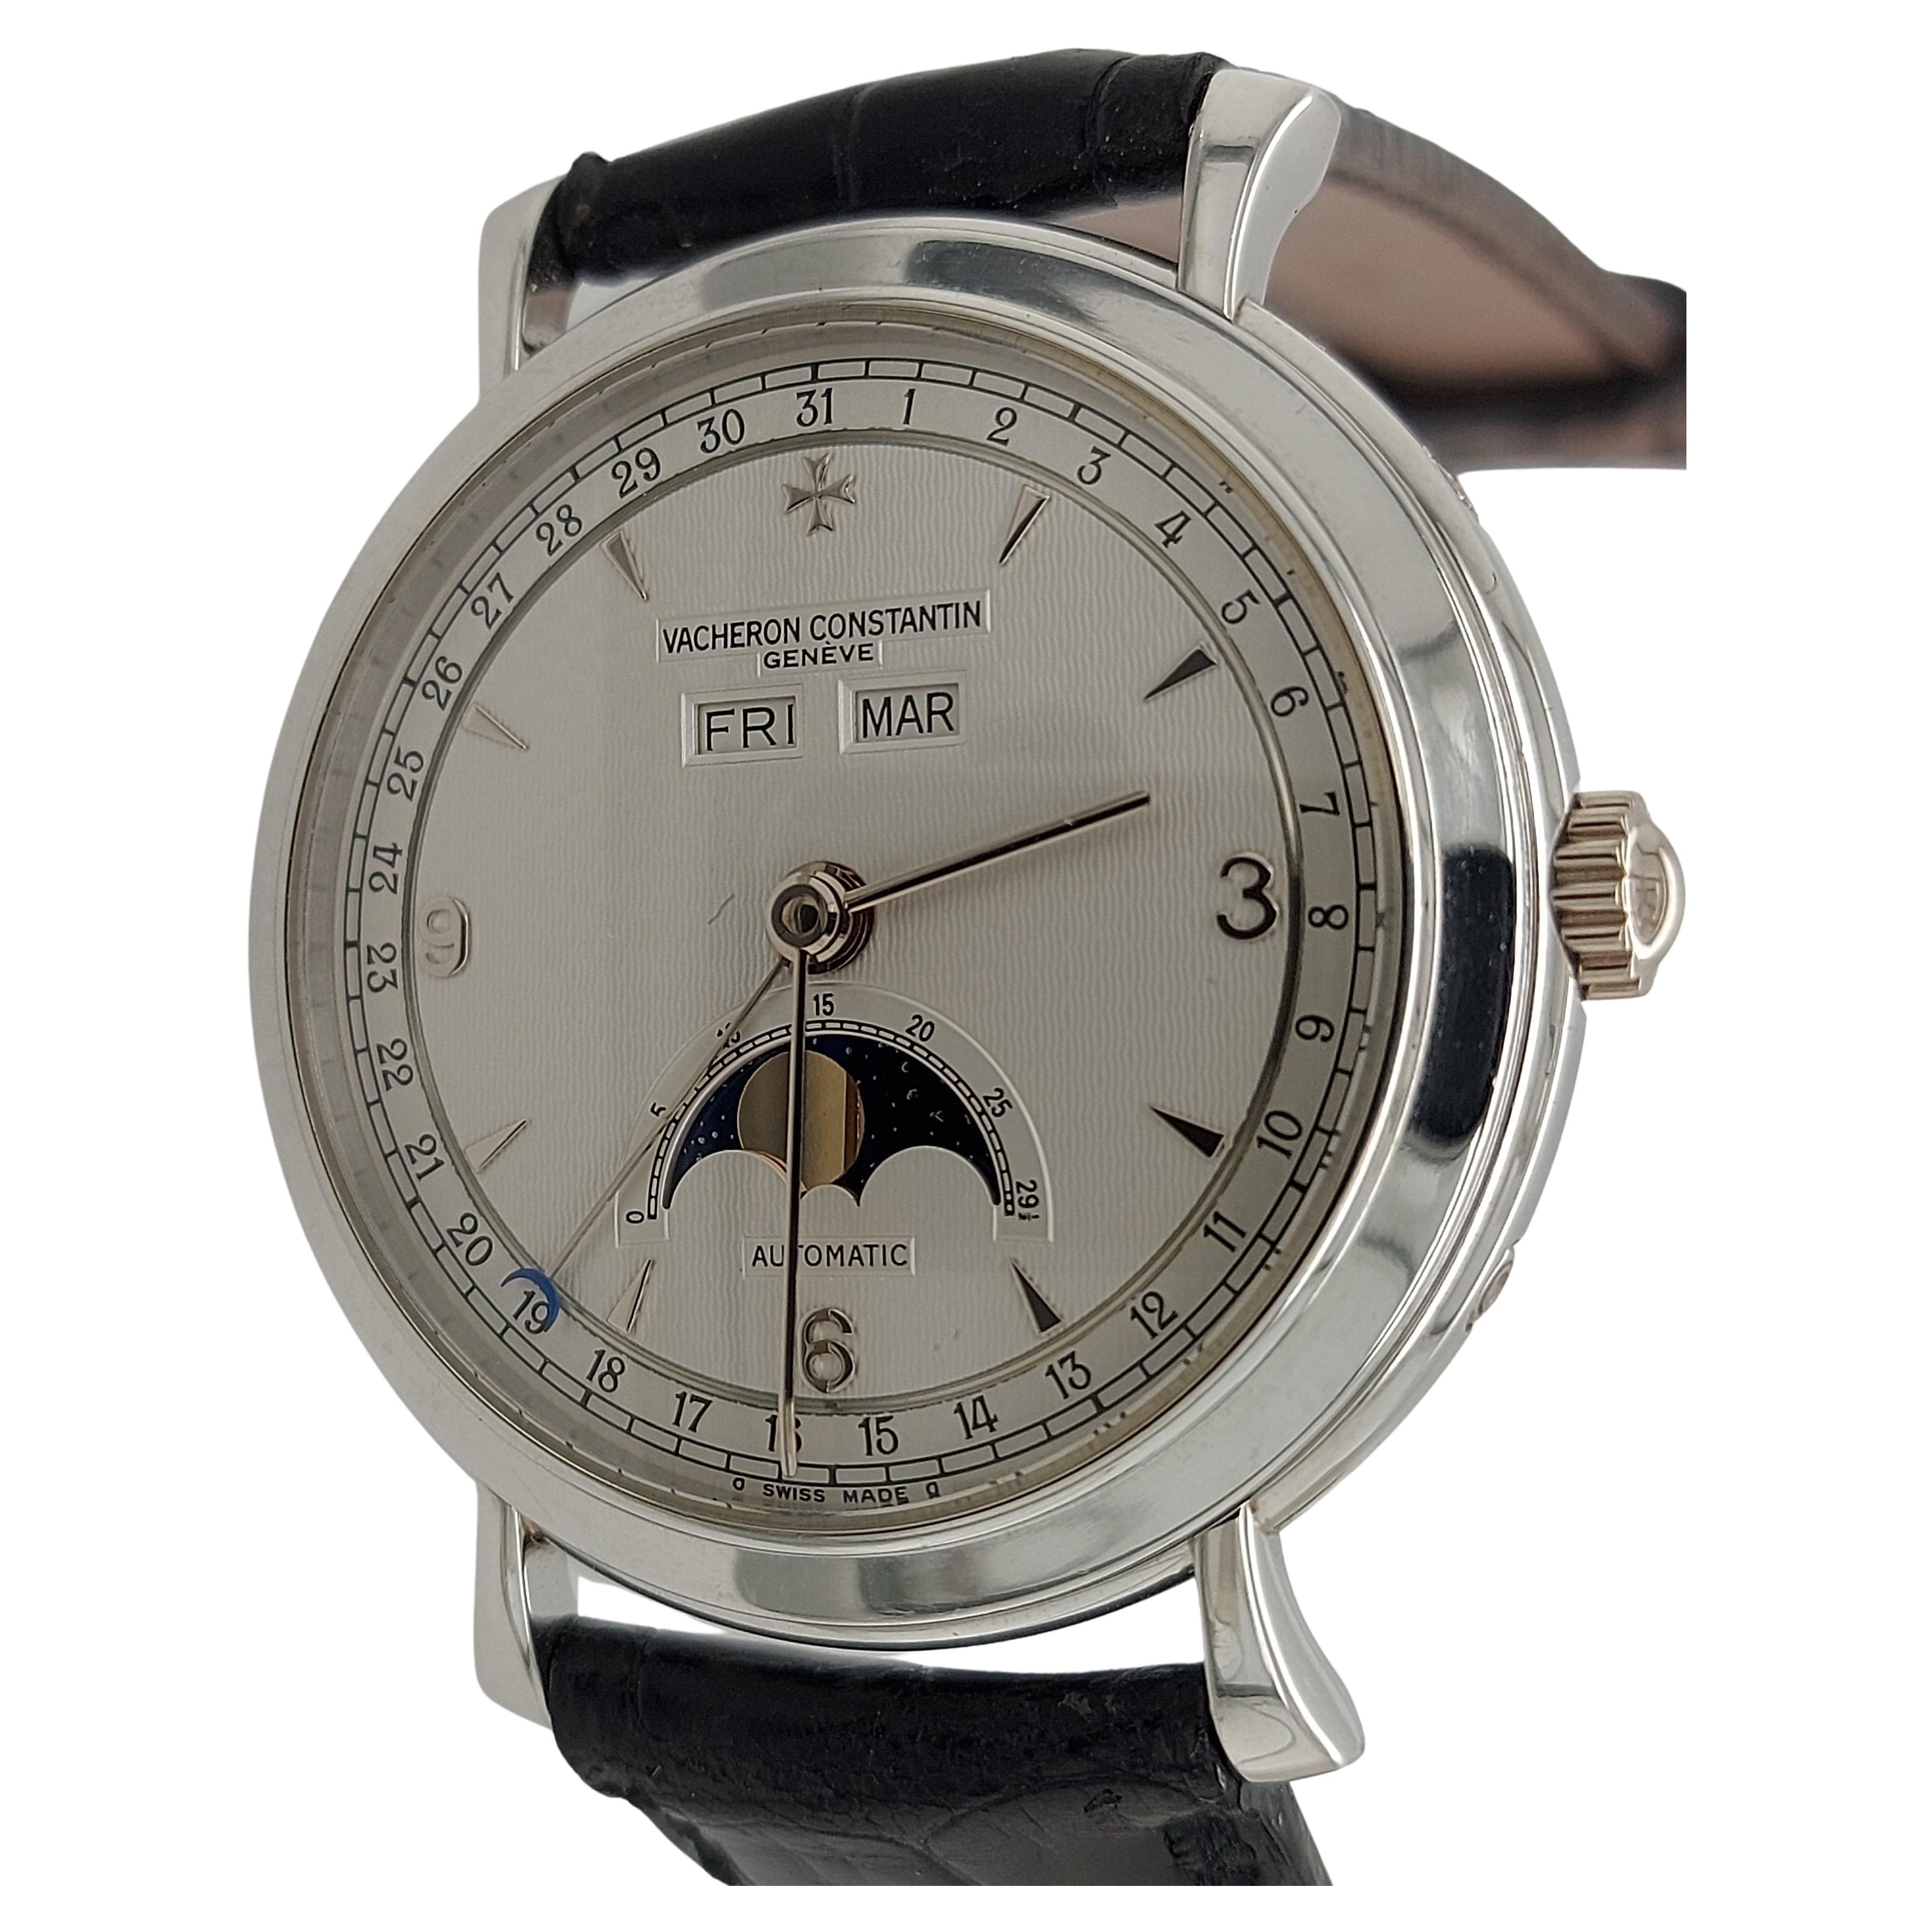 Platinum Like New Vacheron Constantin Platinum Automatic Annual calendar

Movement: Automatic Caliber 1126

Functions: Hours, minutes, seconds, complete calendar (date, day, month, moon phases).

Case: Platinum, diameter 36.2 mm, thickness 10mm,